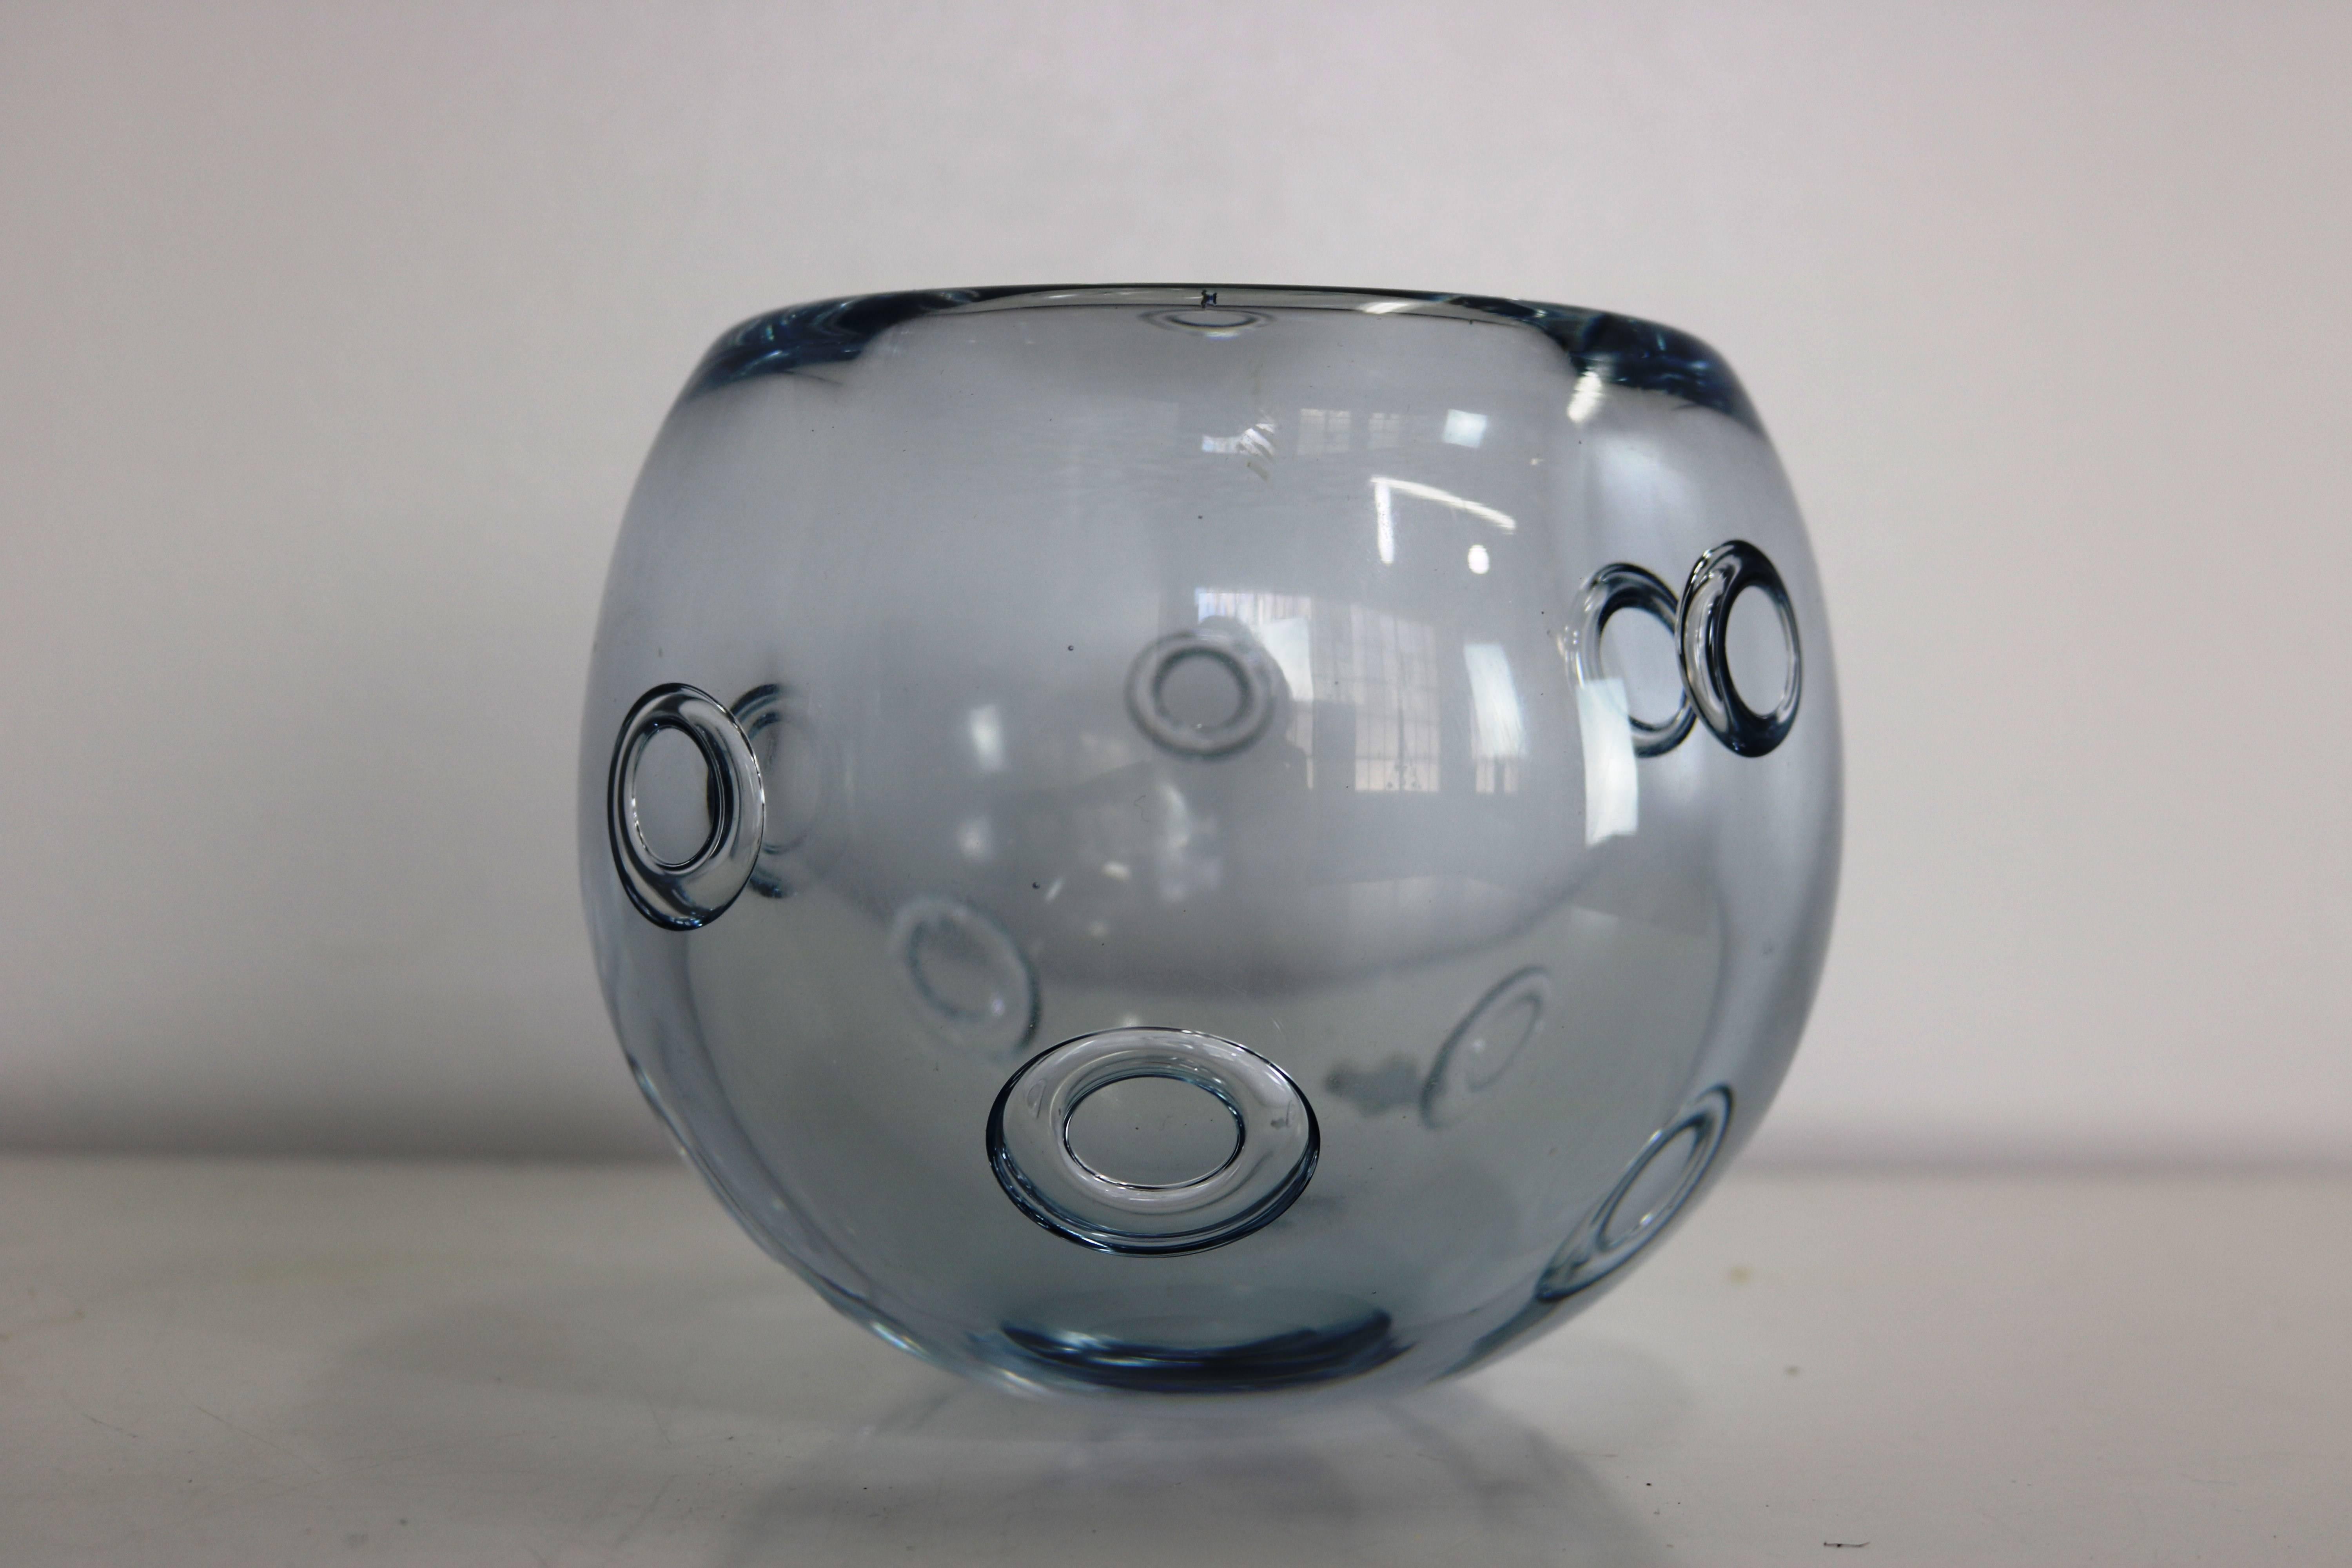 Lovely round glass vase adorned with ring-shaped bubbles throughout in Strombergshyttan's signature blue-silver glass. 

Lindfors Glassworks was founded in 1876 and changed its name to Strombergshyttan in 1933, when Edward Stromberg, former head